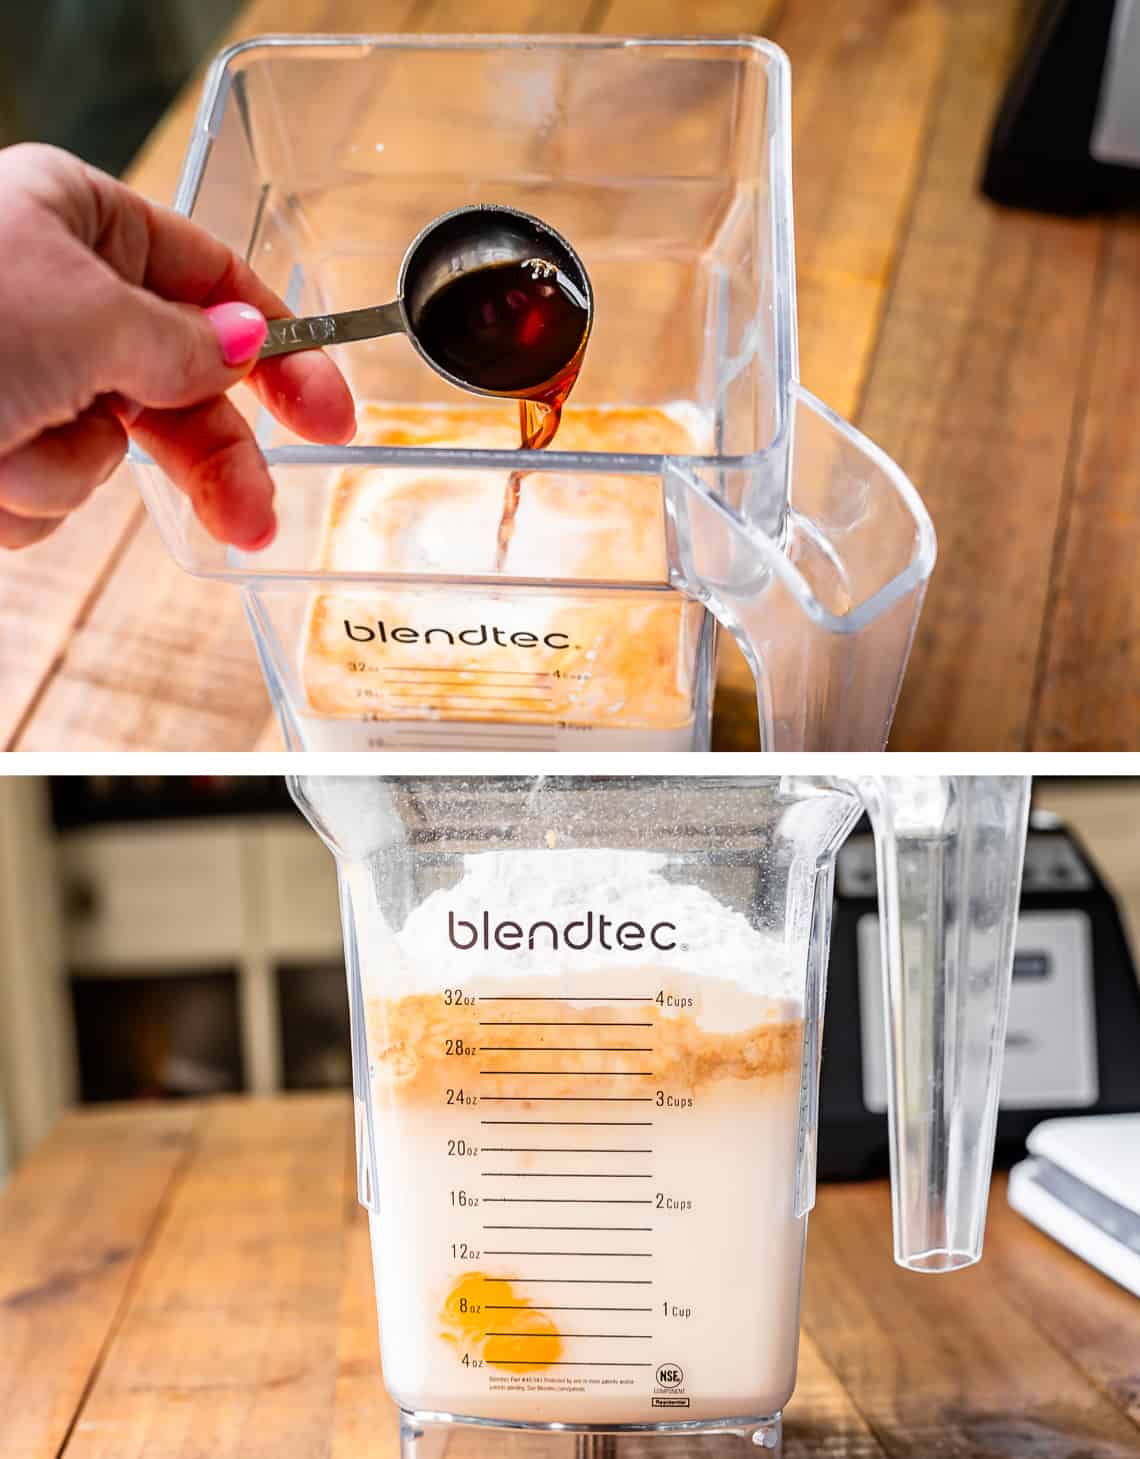 top pouring vanilla into the blender, bottom blender from the side showing ingredients to blend.